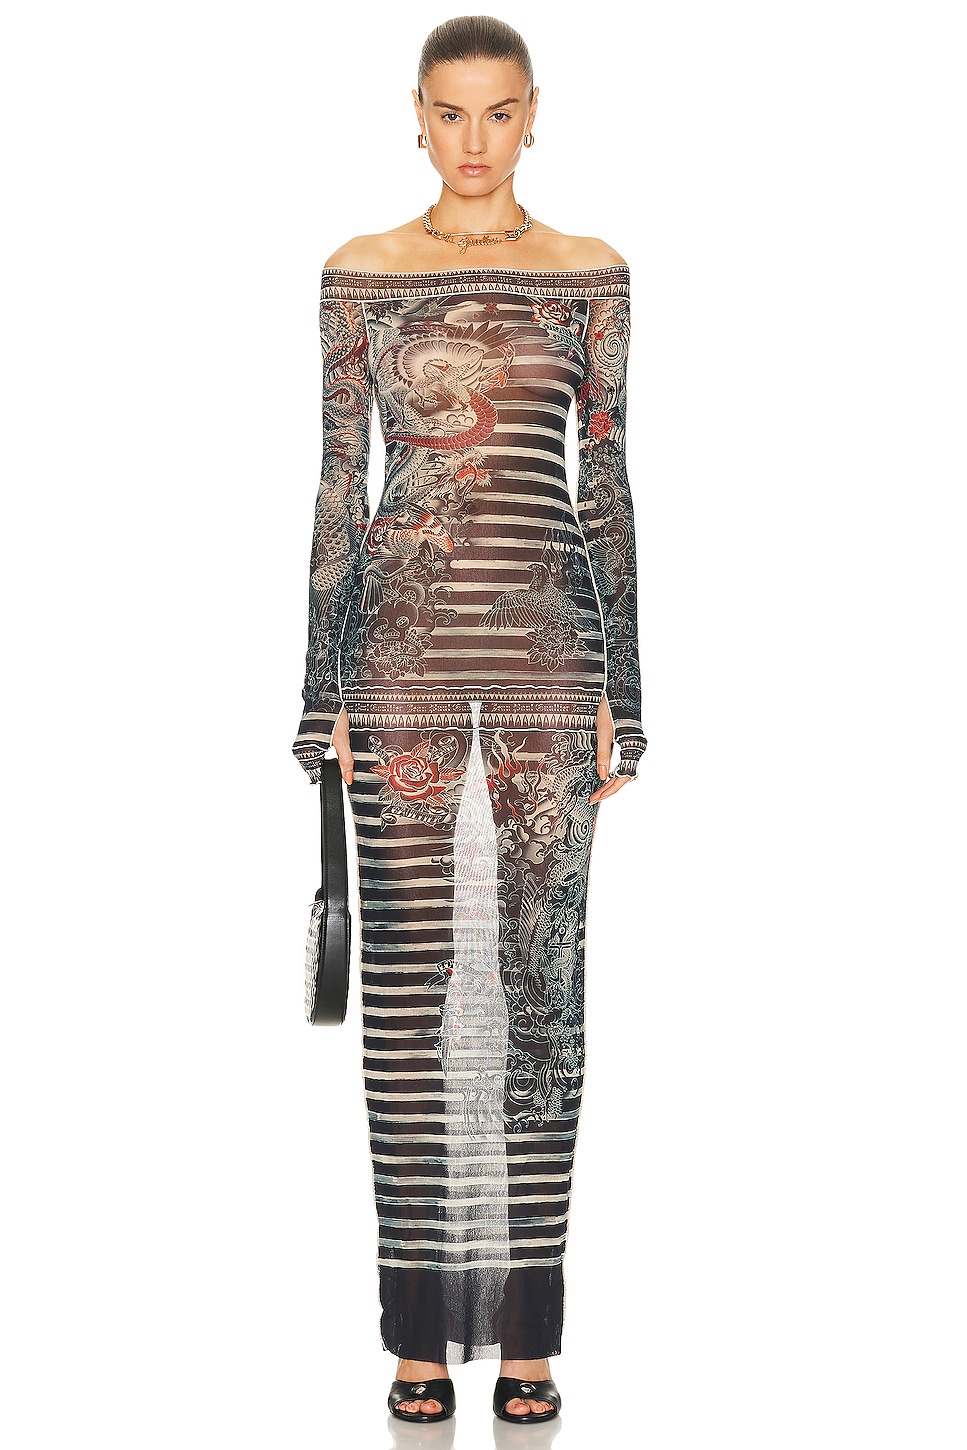 Image 1 of Jean Paul Gaultier Printed Mariniere Tattoo Long Boat Neck Dress in Navy, Blue, & White